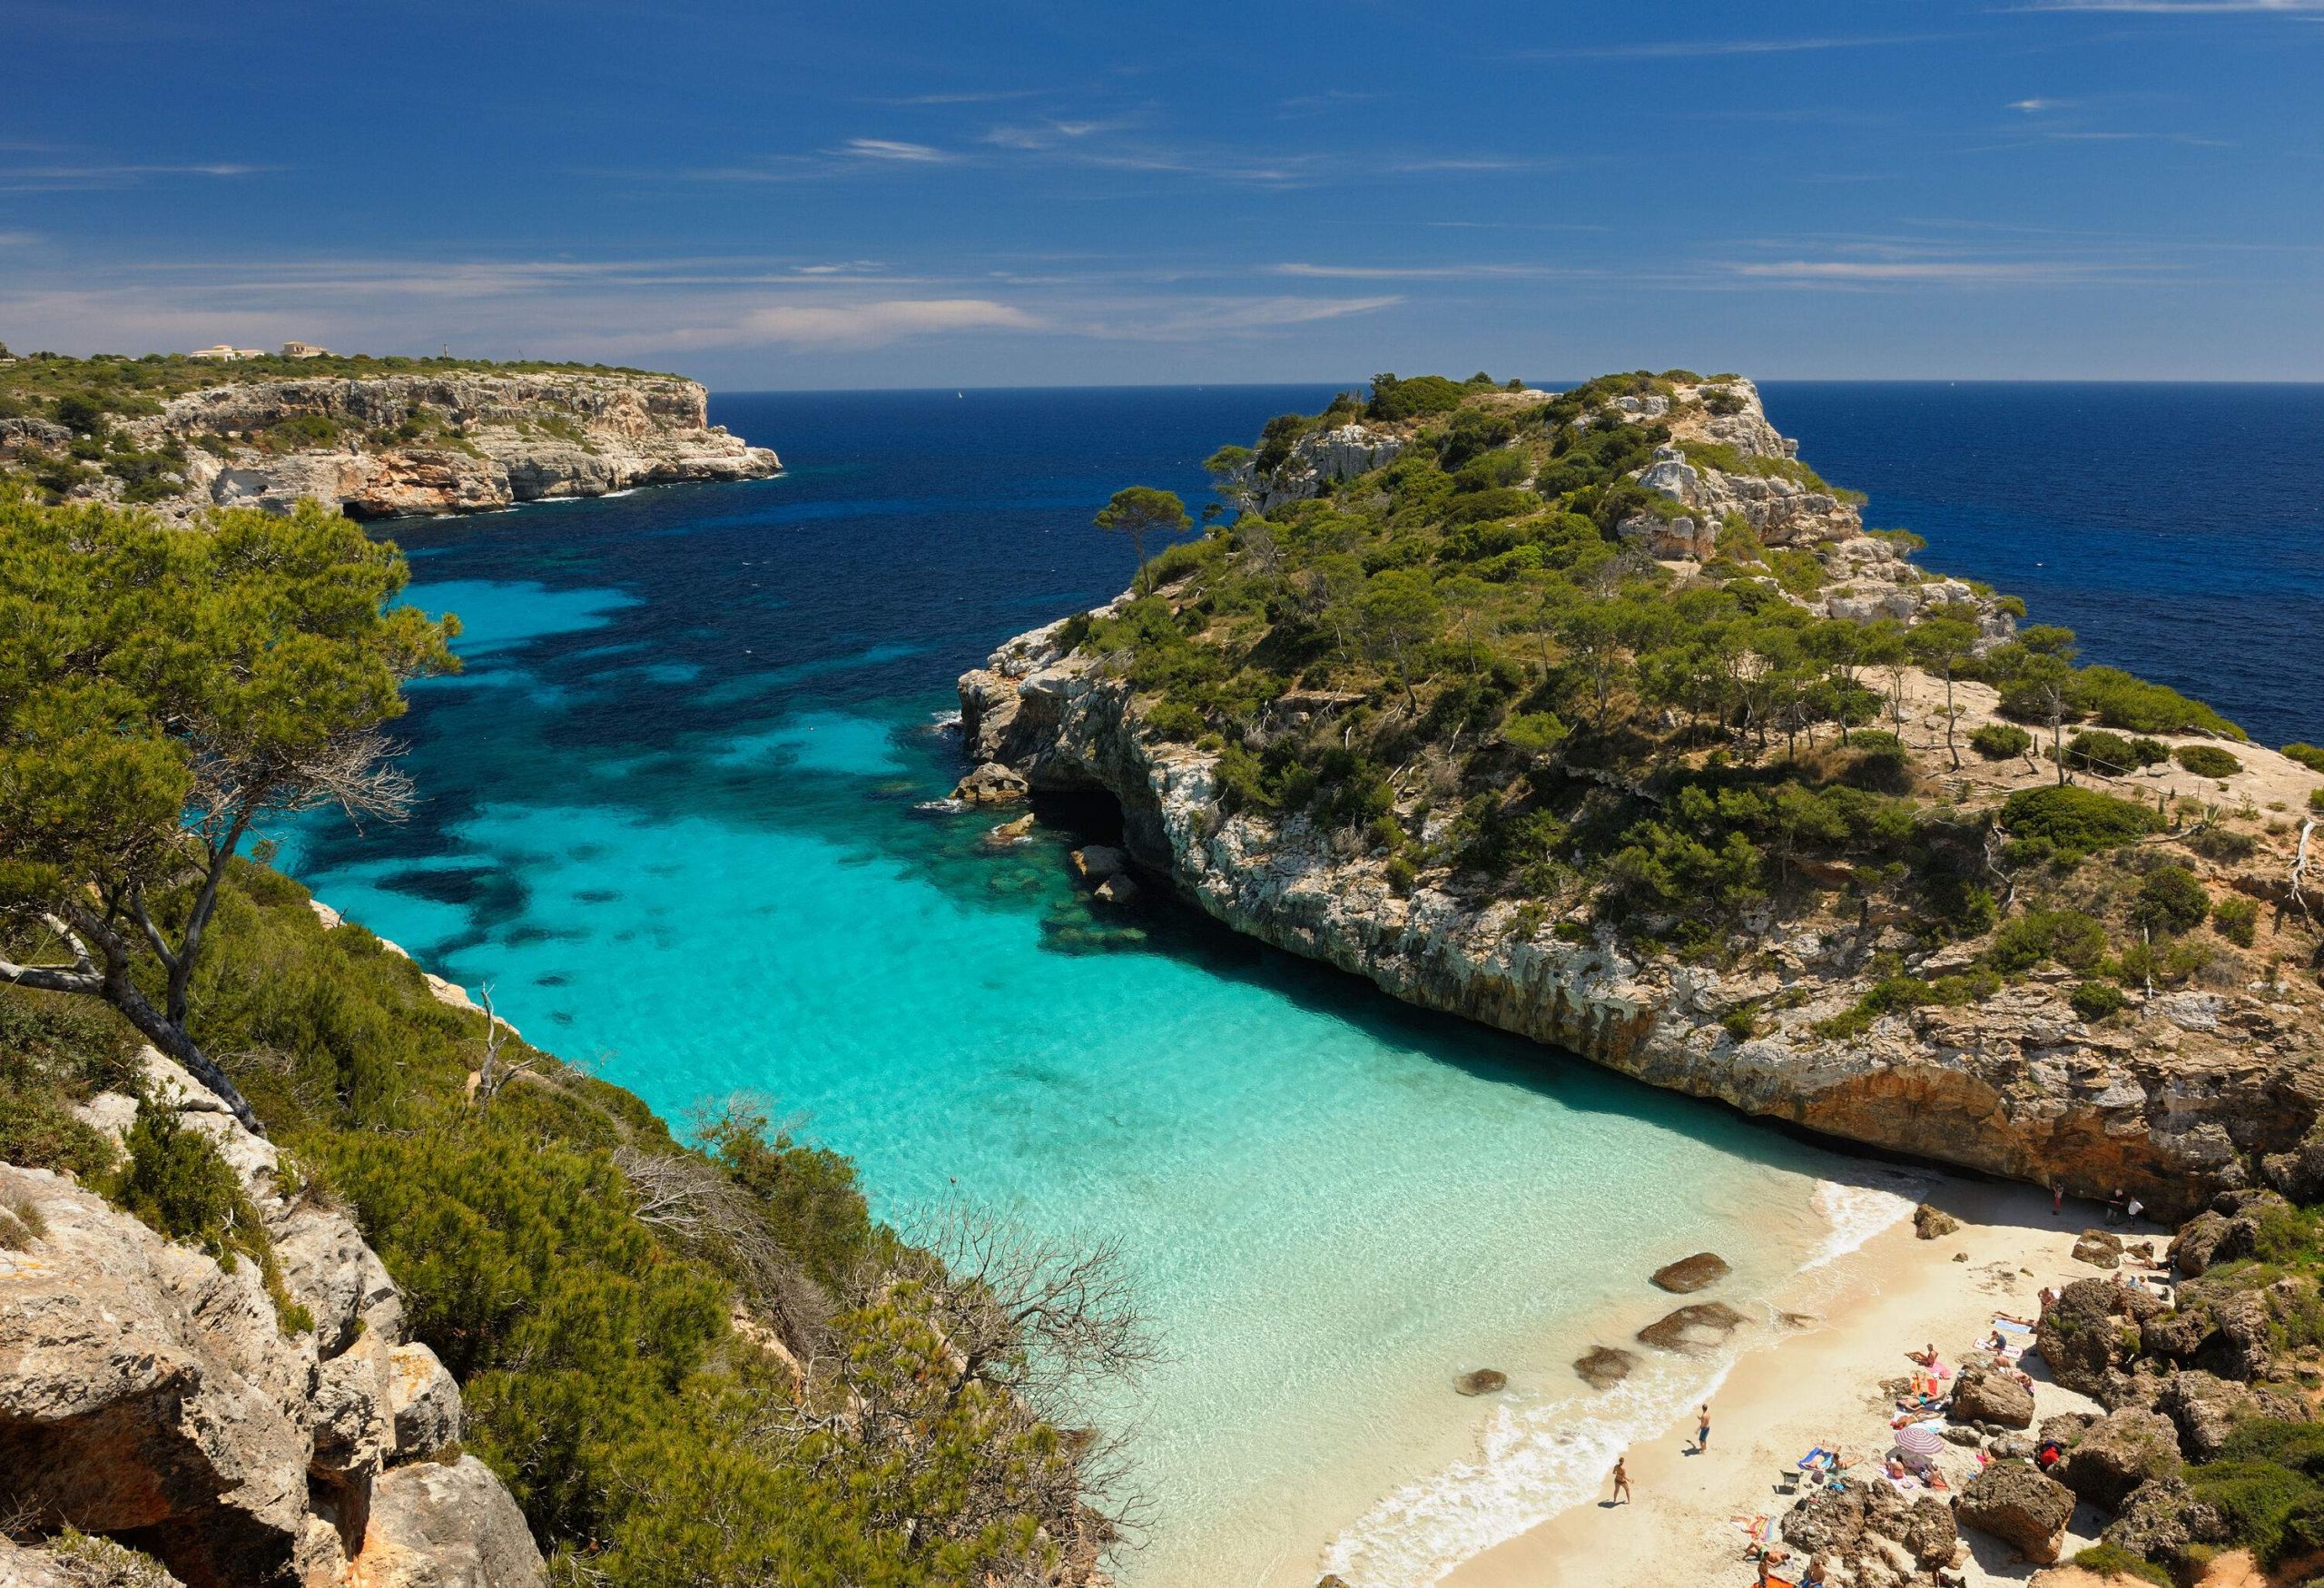 A shallow sandy beach with clear and tranquil waters along steep rocky cliffs.